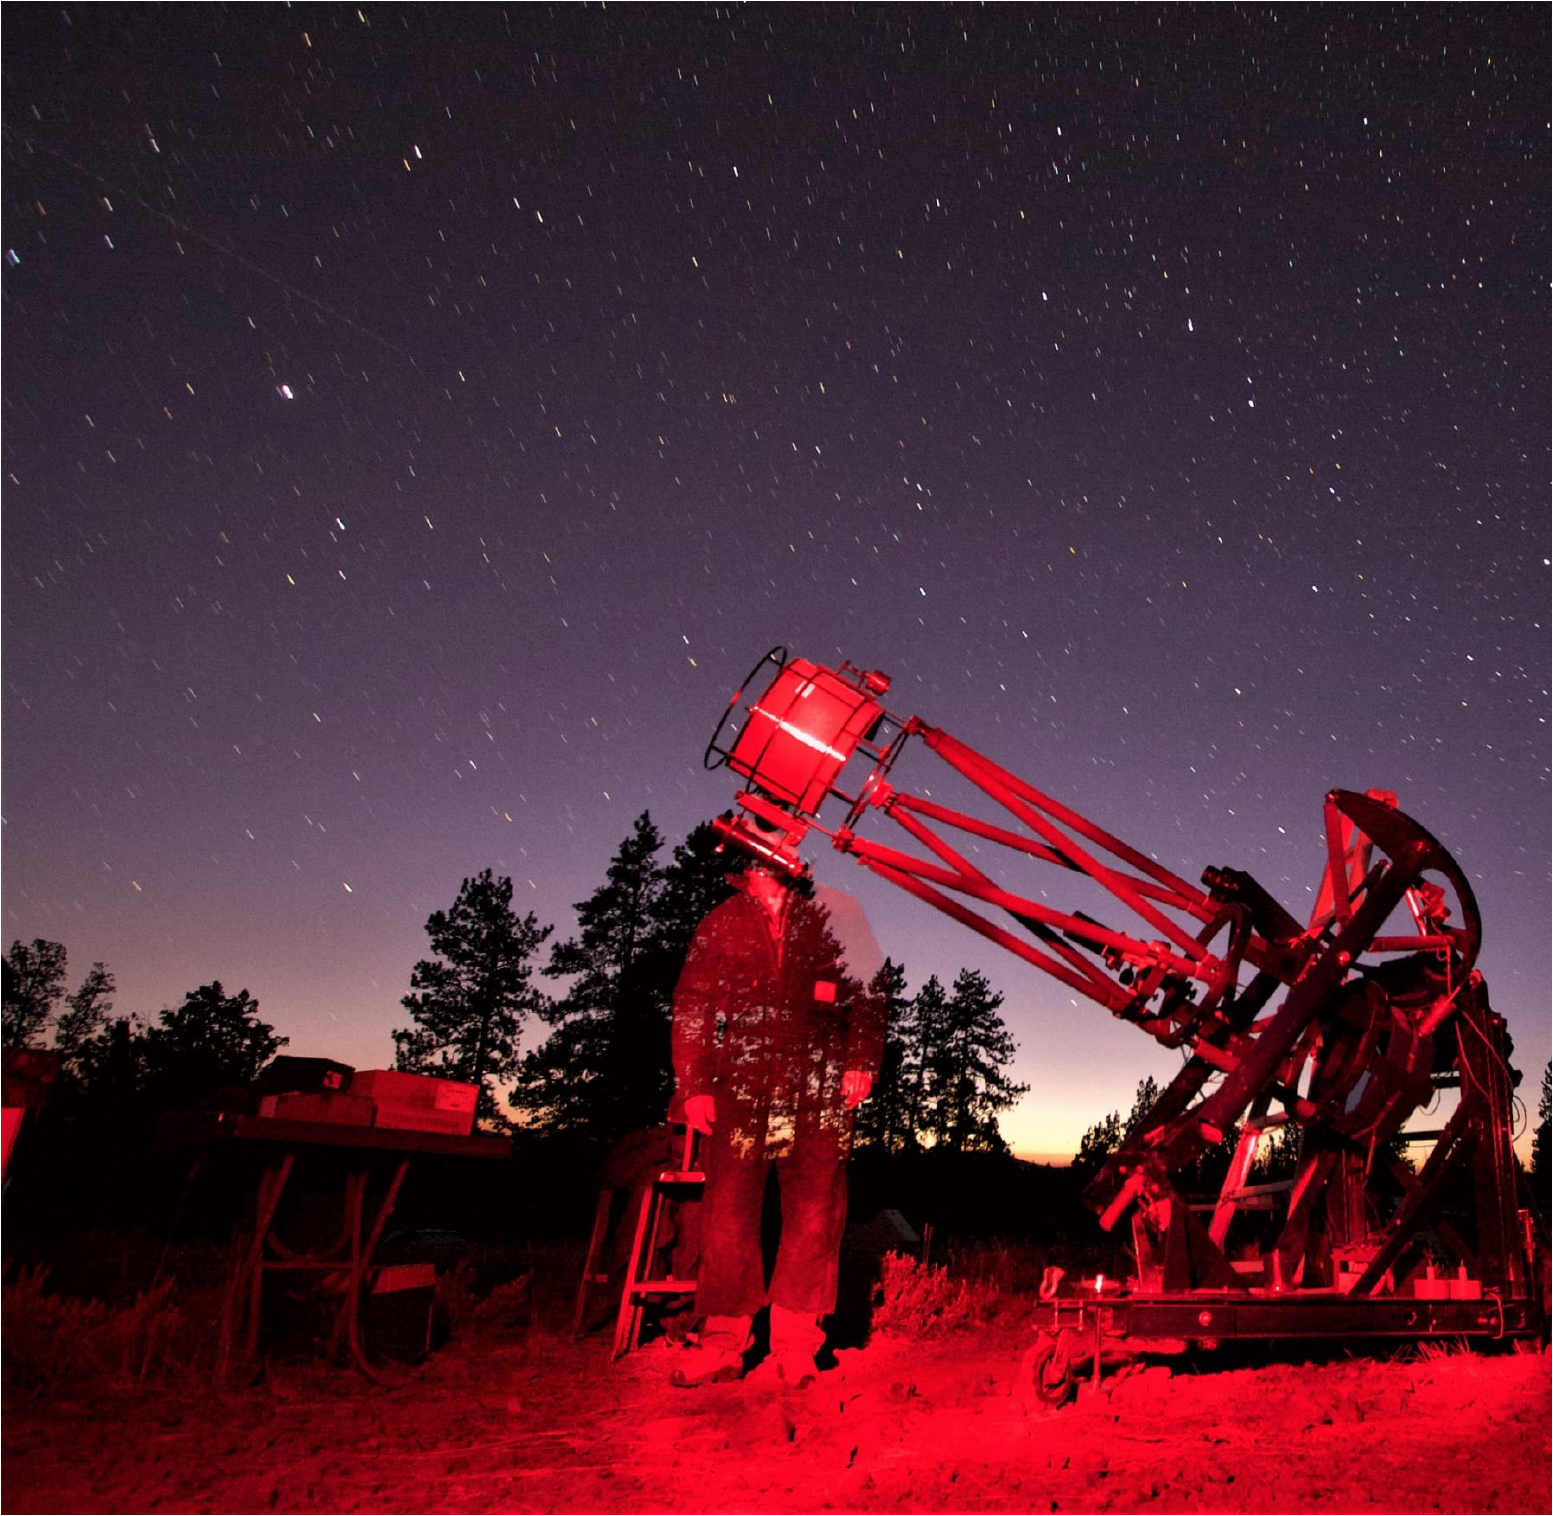 Carlton Observatory pulls the universe closer to Yamhill County image picture image